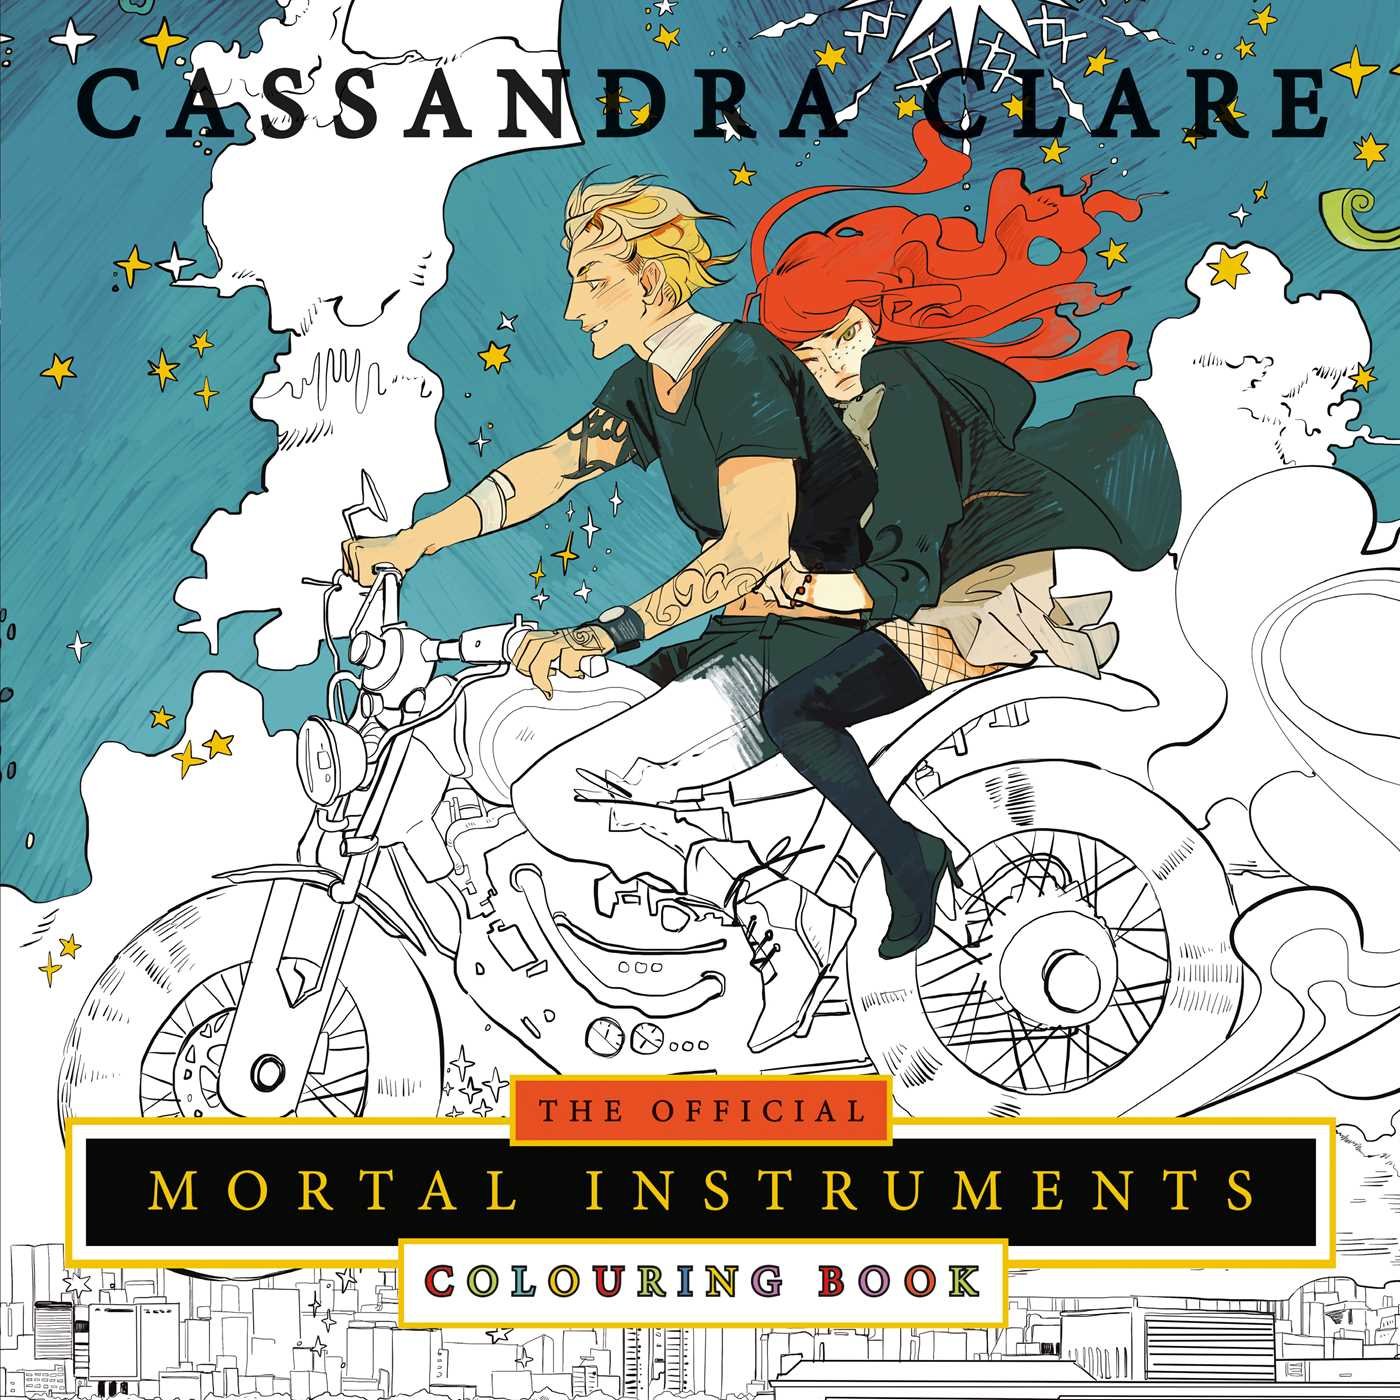 The Official Mortal Instruments Colouring Book | Cassandra Clare